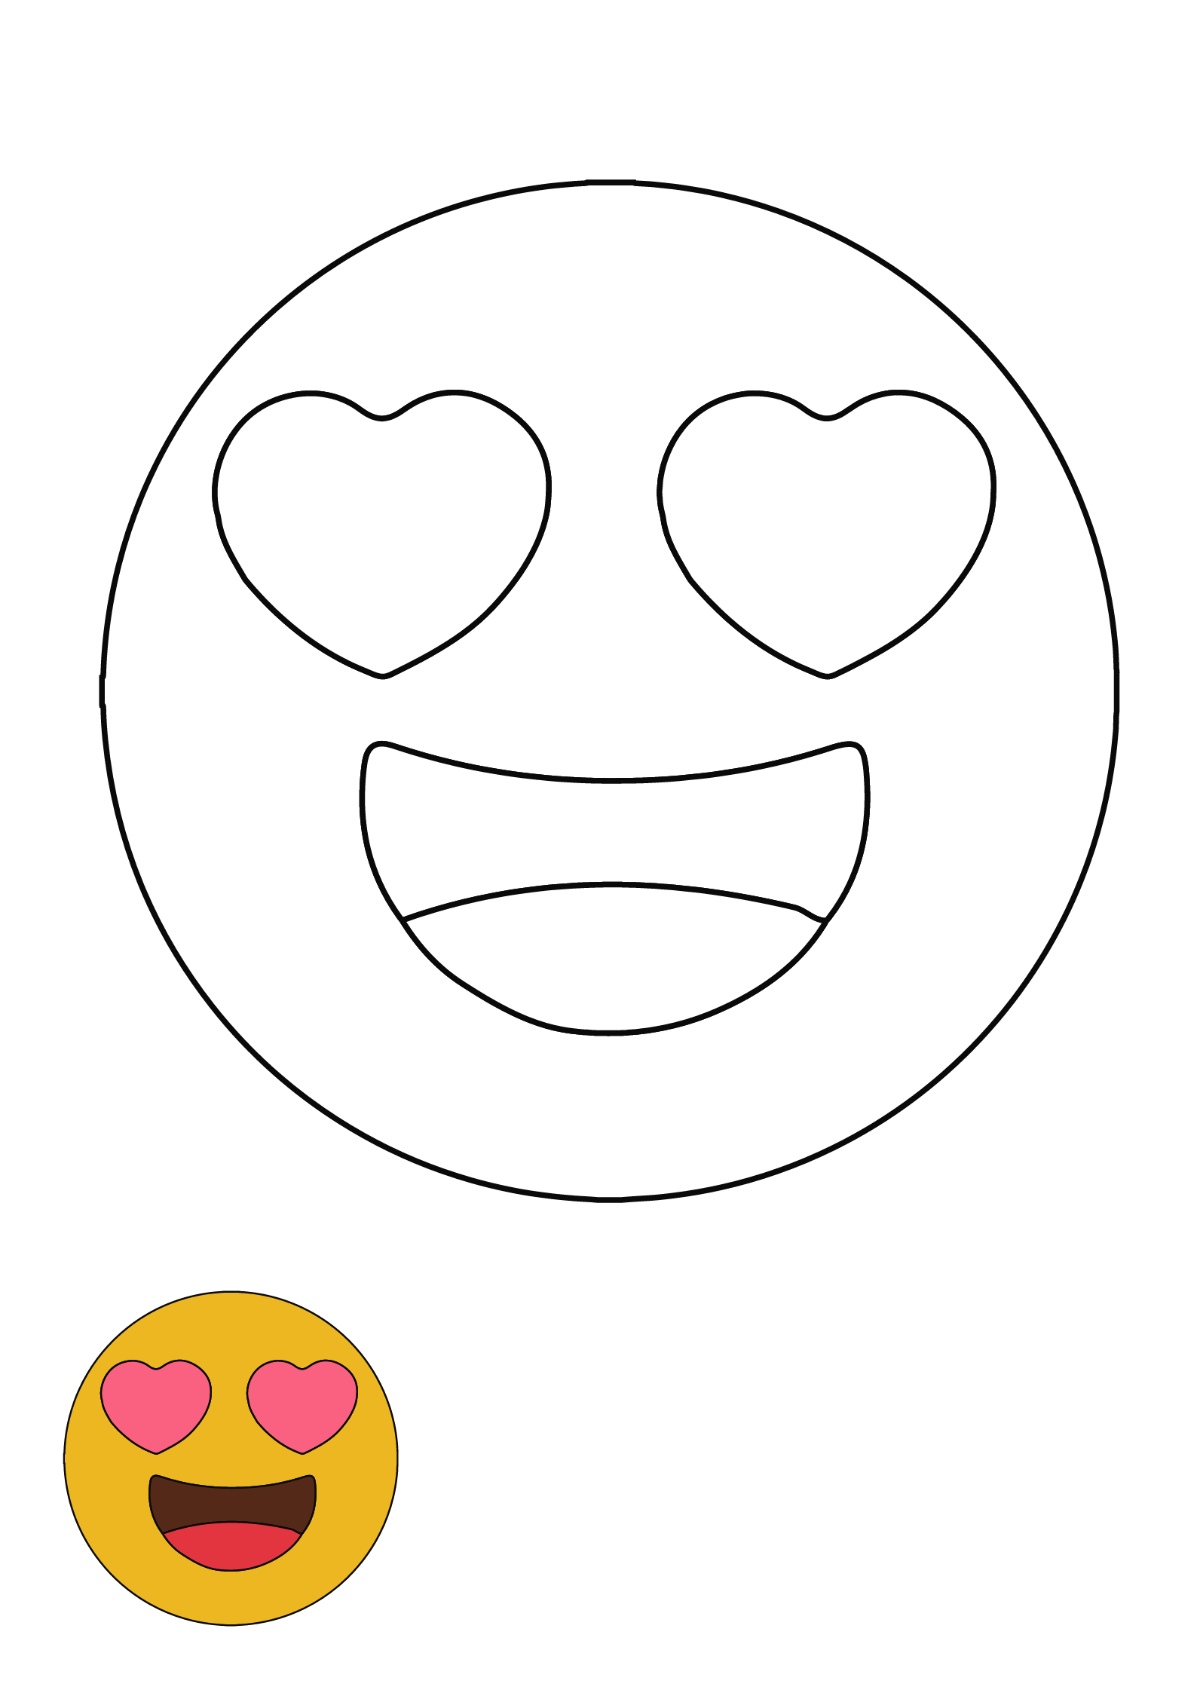 In Love Smiley coloring page Template